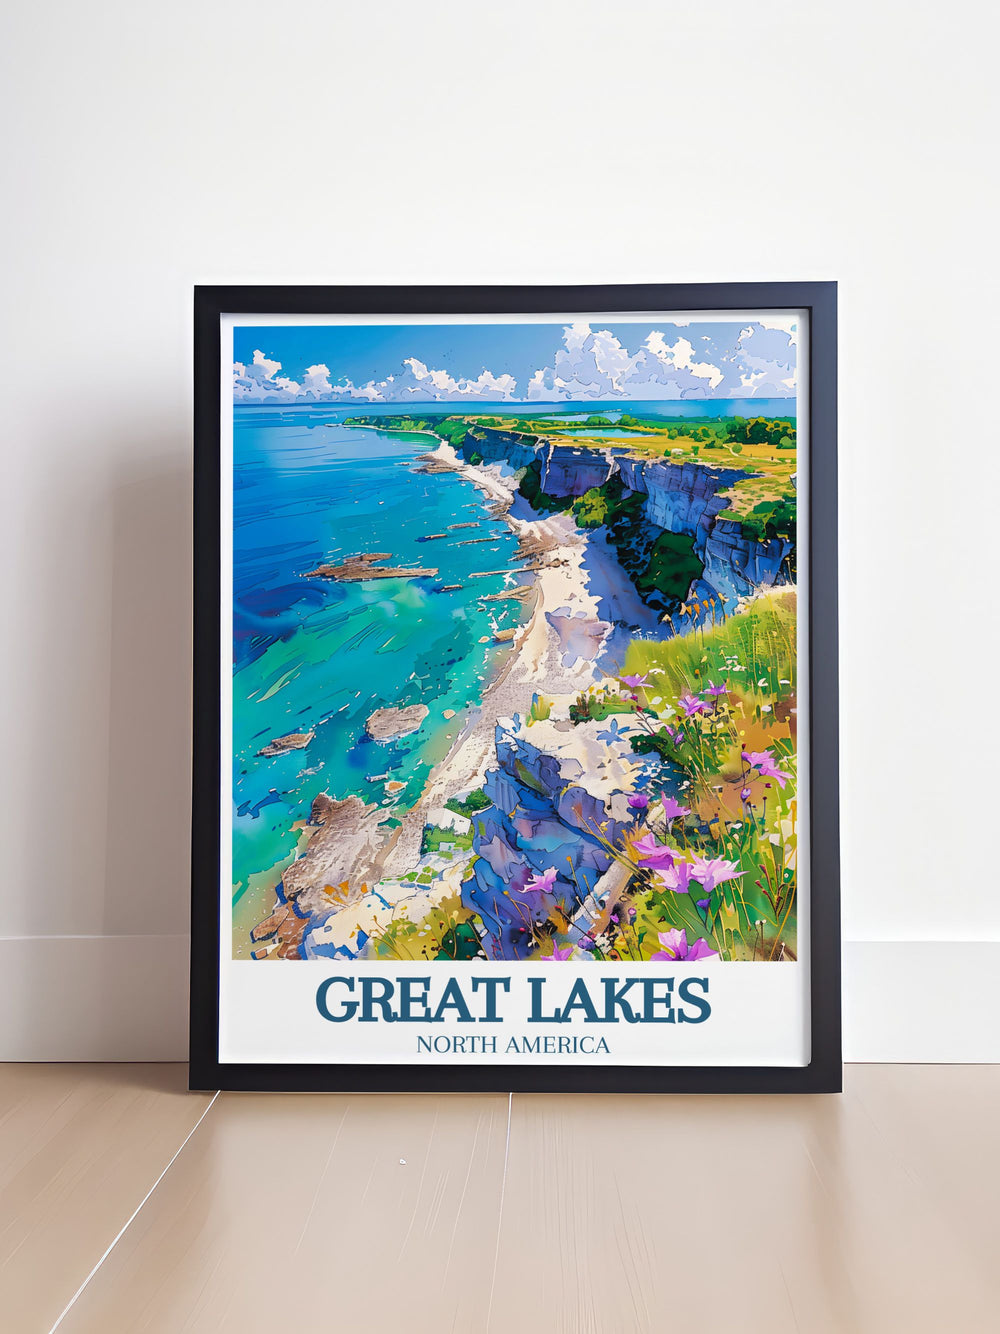 This detailed travel poster of Lake Erie illustrates its expansive waters and serene environment, making it an ideal piece for nature lovers looking to bring a touch of tranquility into their home.